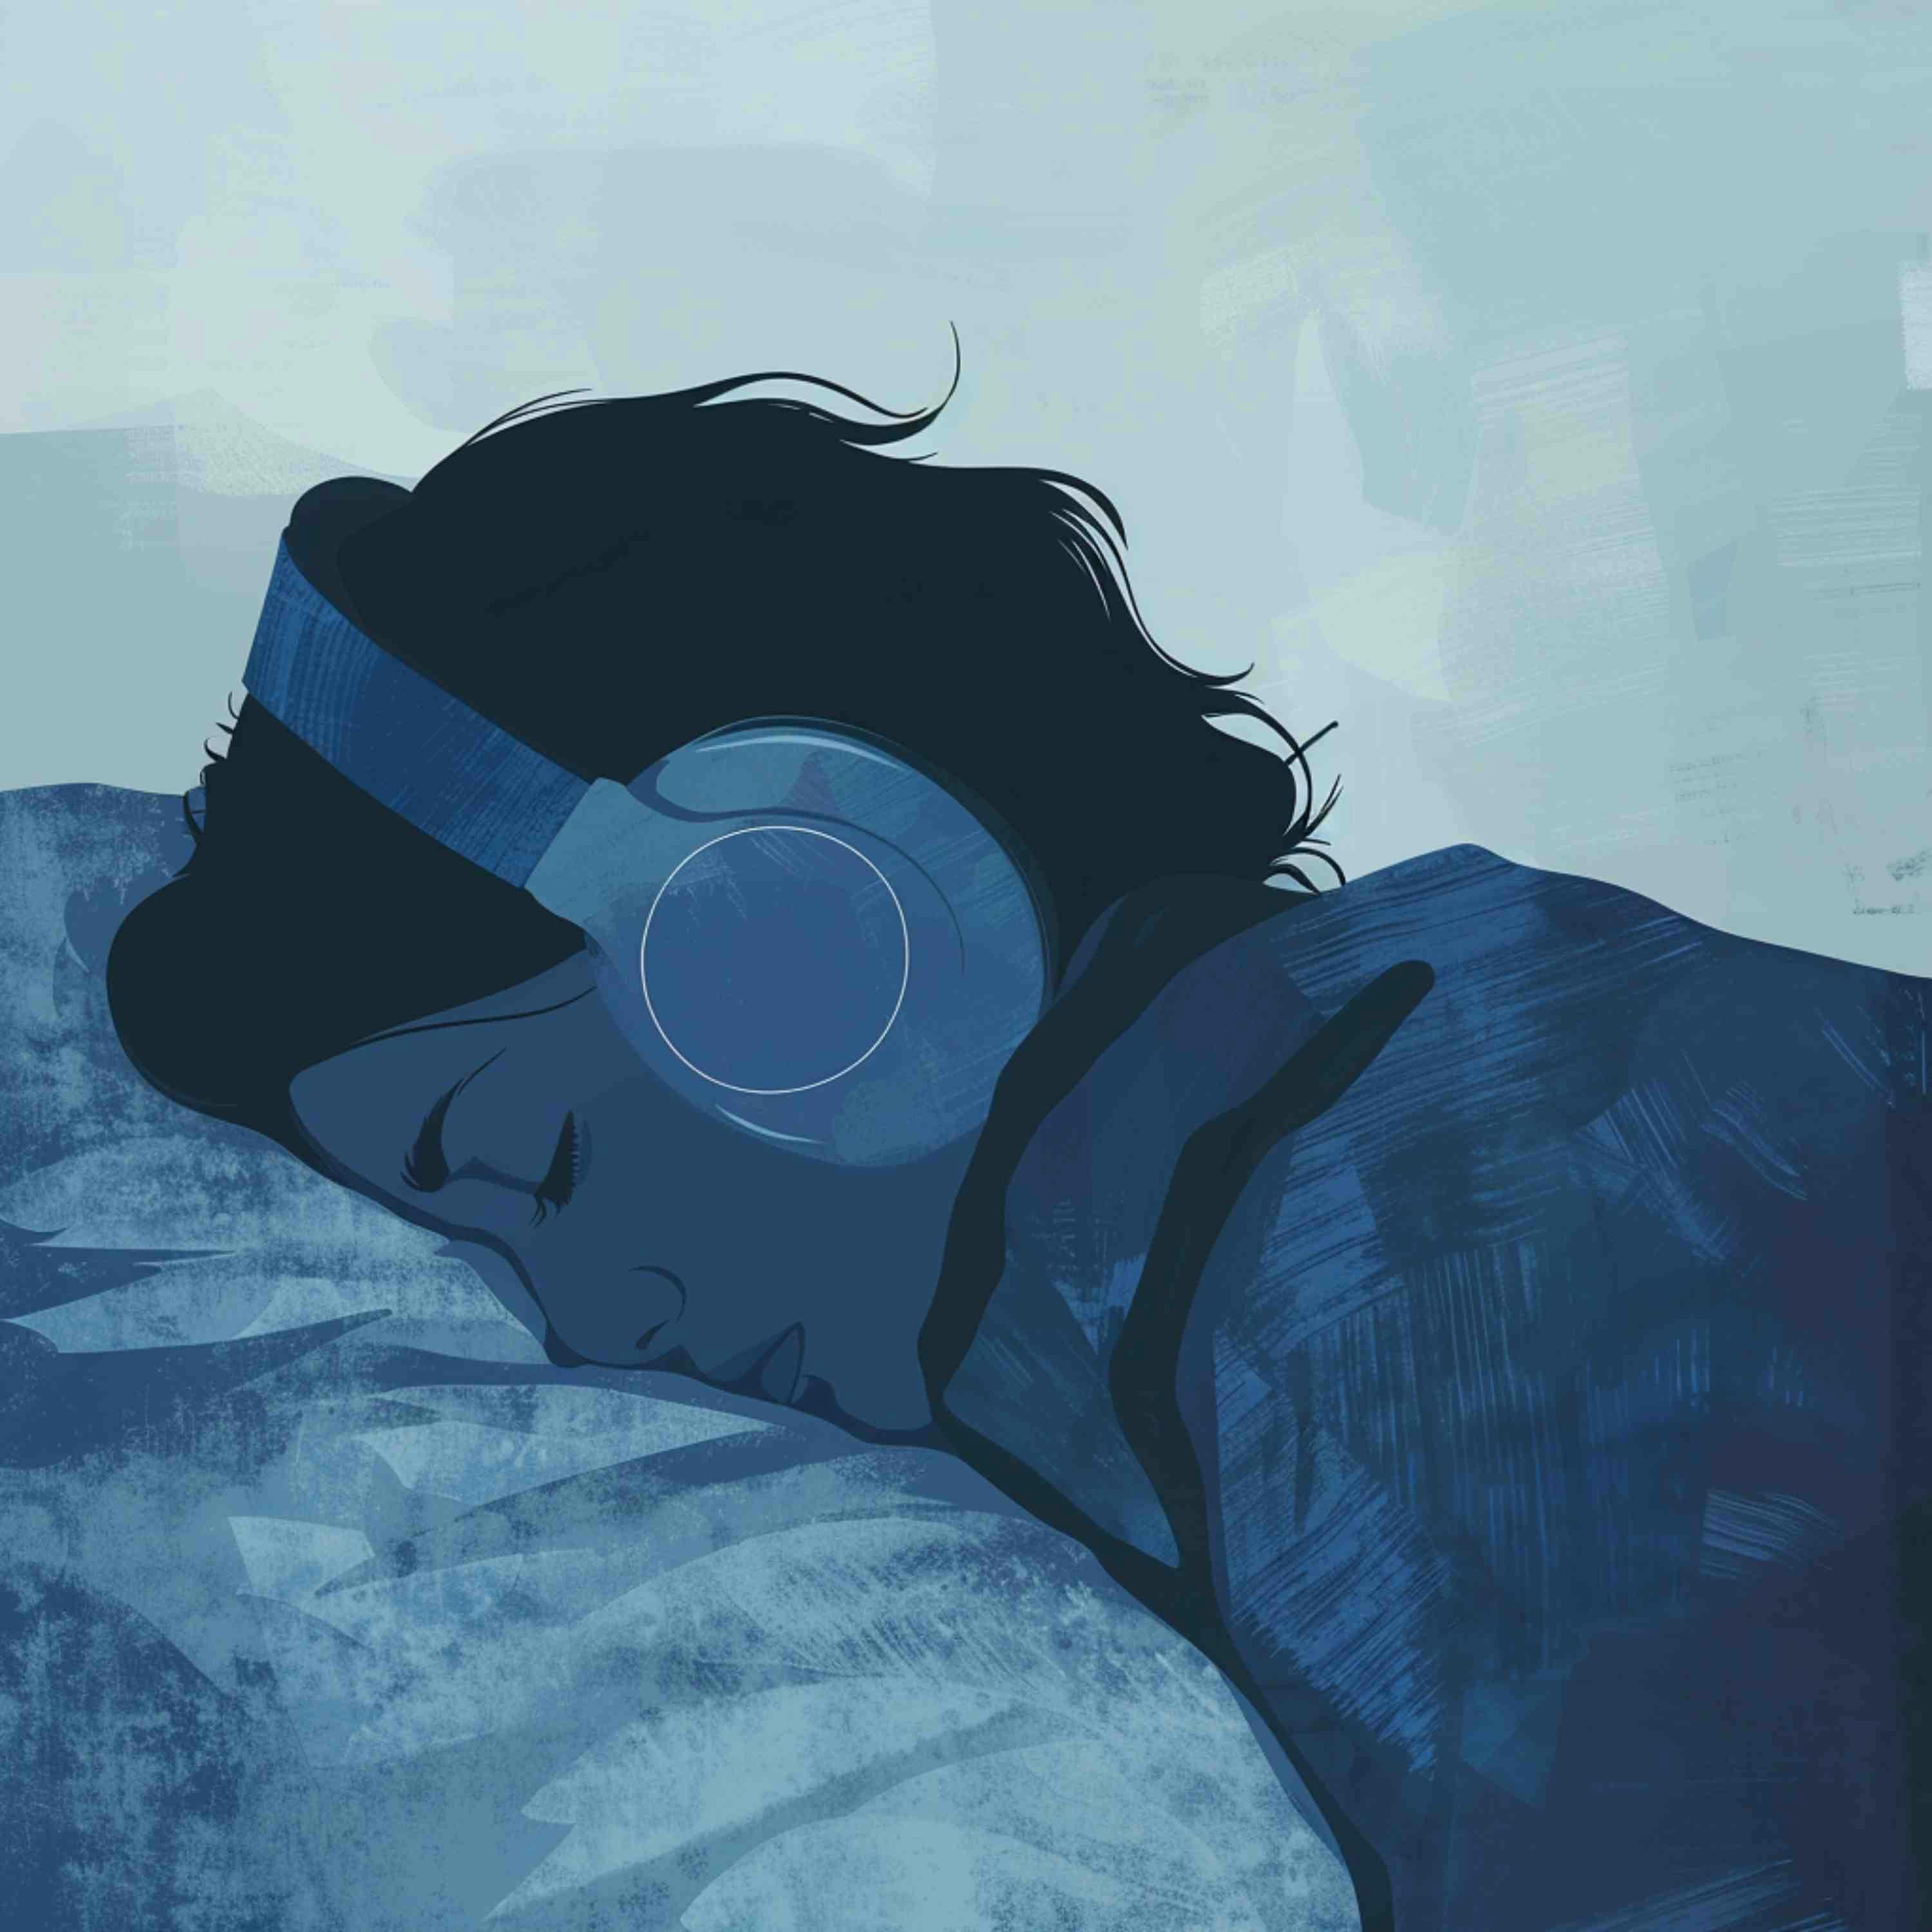 3177: Q&A - Health Effects of Listening to Podcasts with Headphones While Sleeping on Sleep Tips